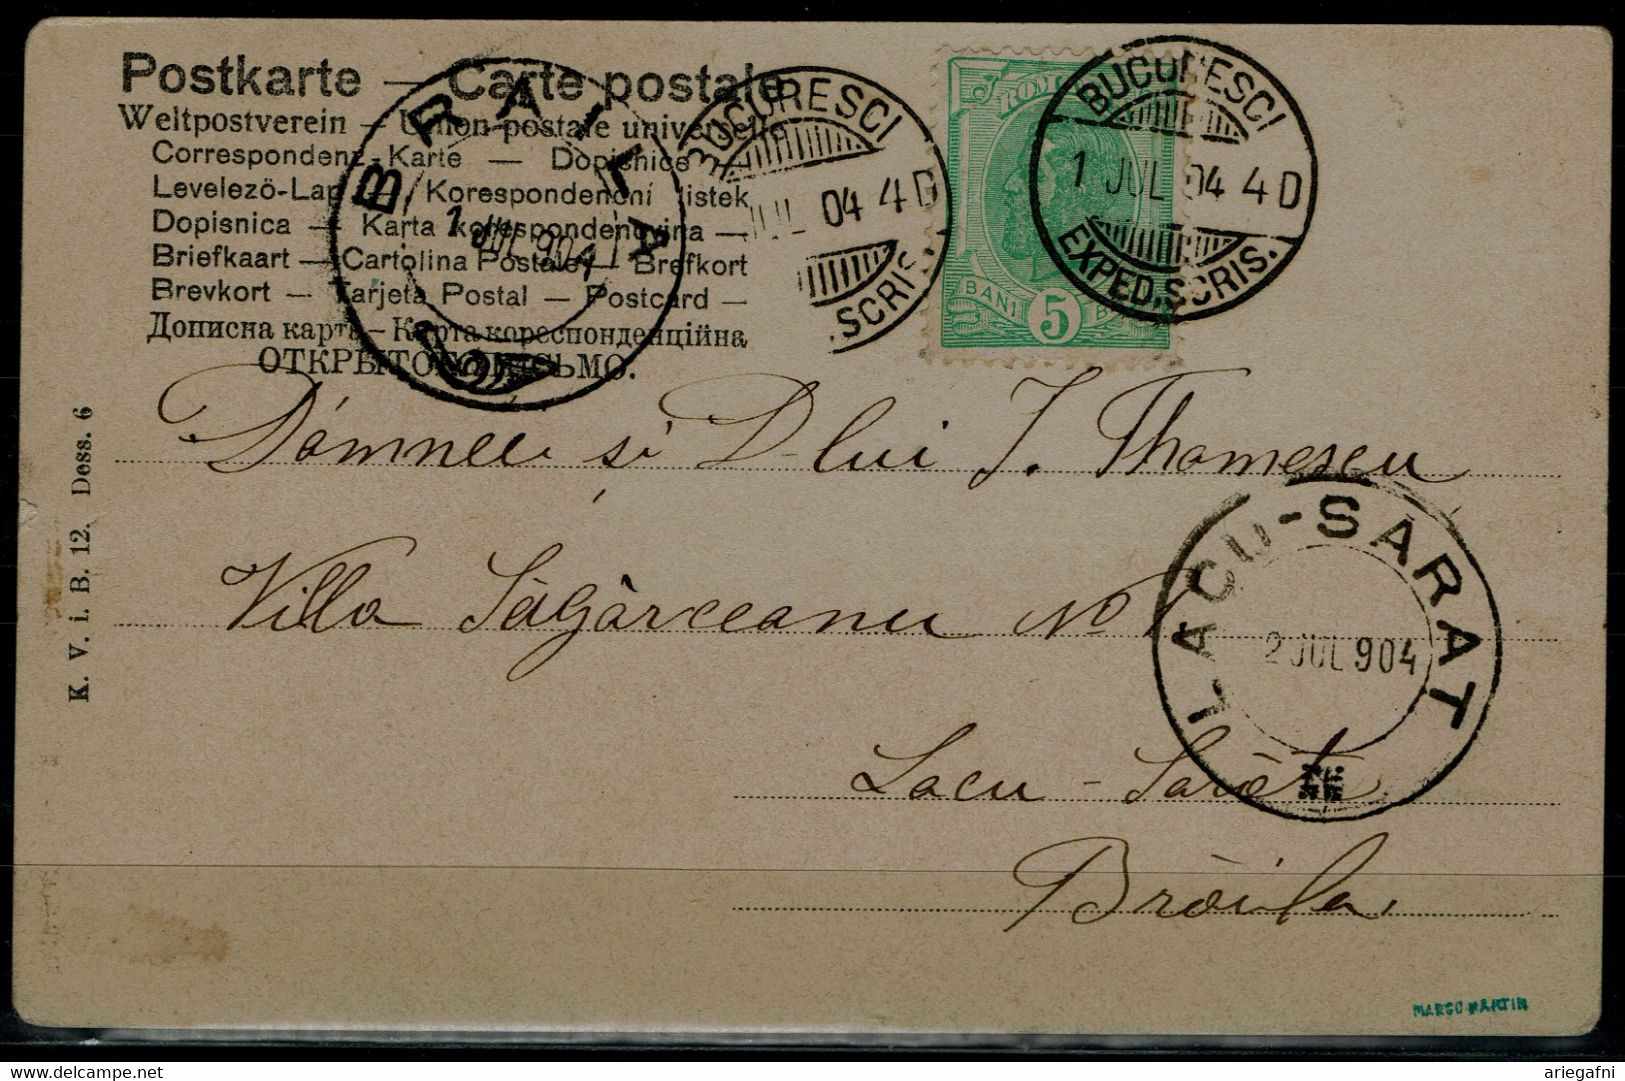 ROMANIA 1904 POSTCARD  SENT FROM BUCHAREST IN 1/7/1904 TO LACU-SARAT VF!! - Covers & Documents